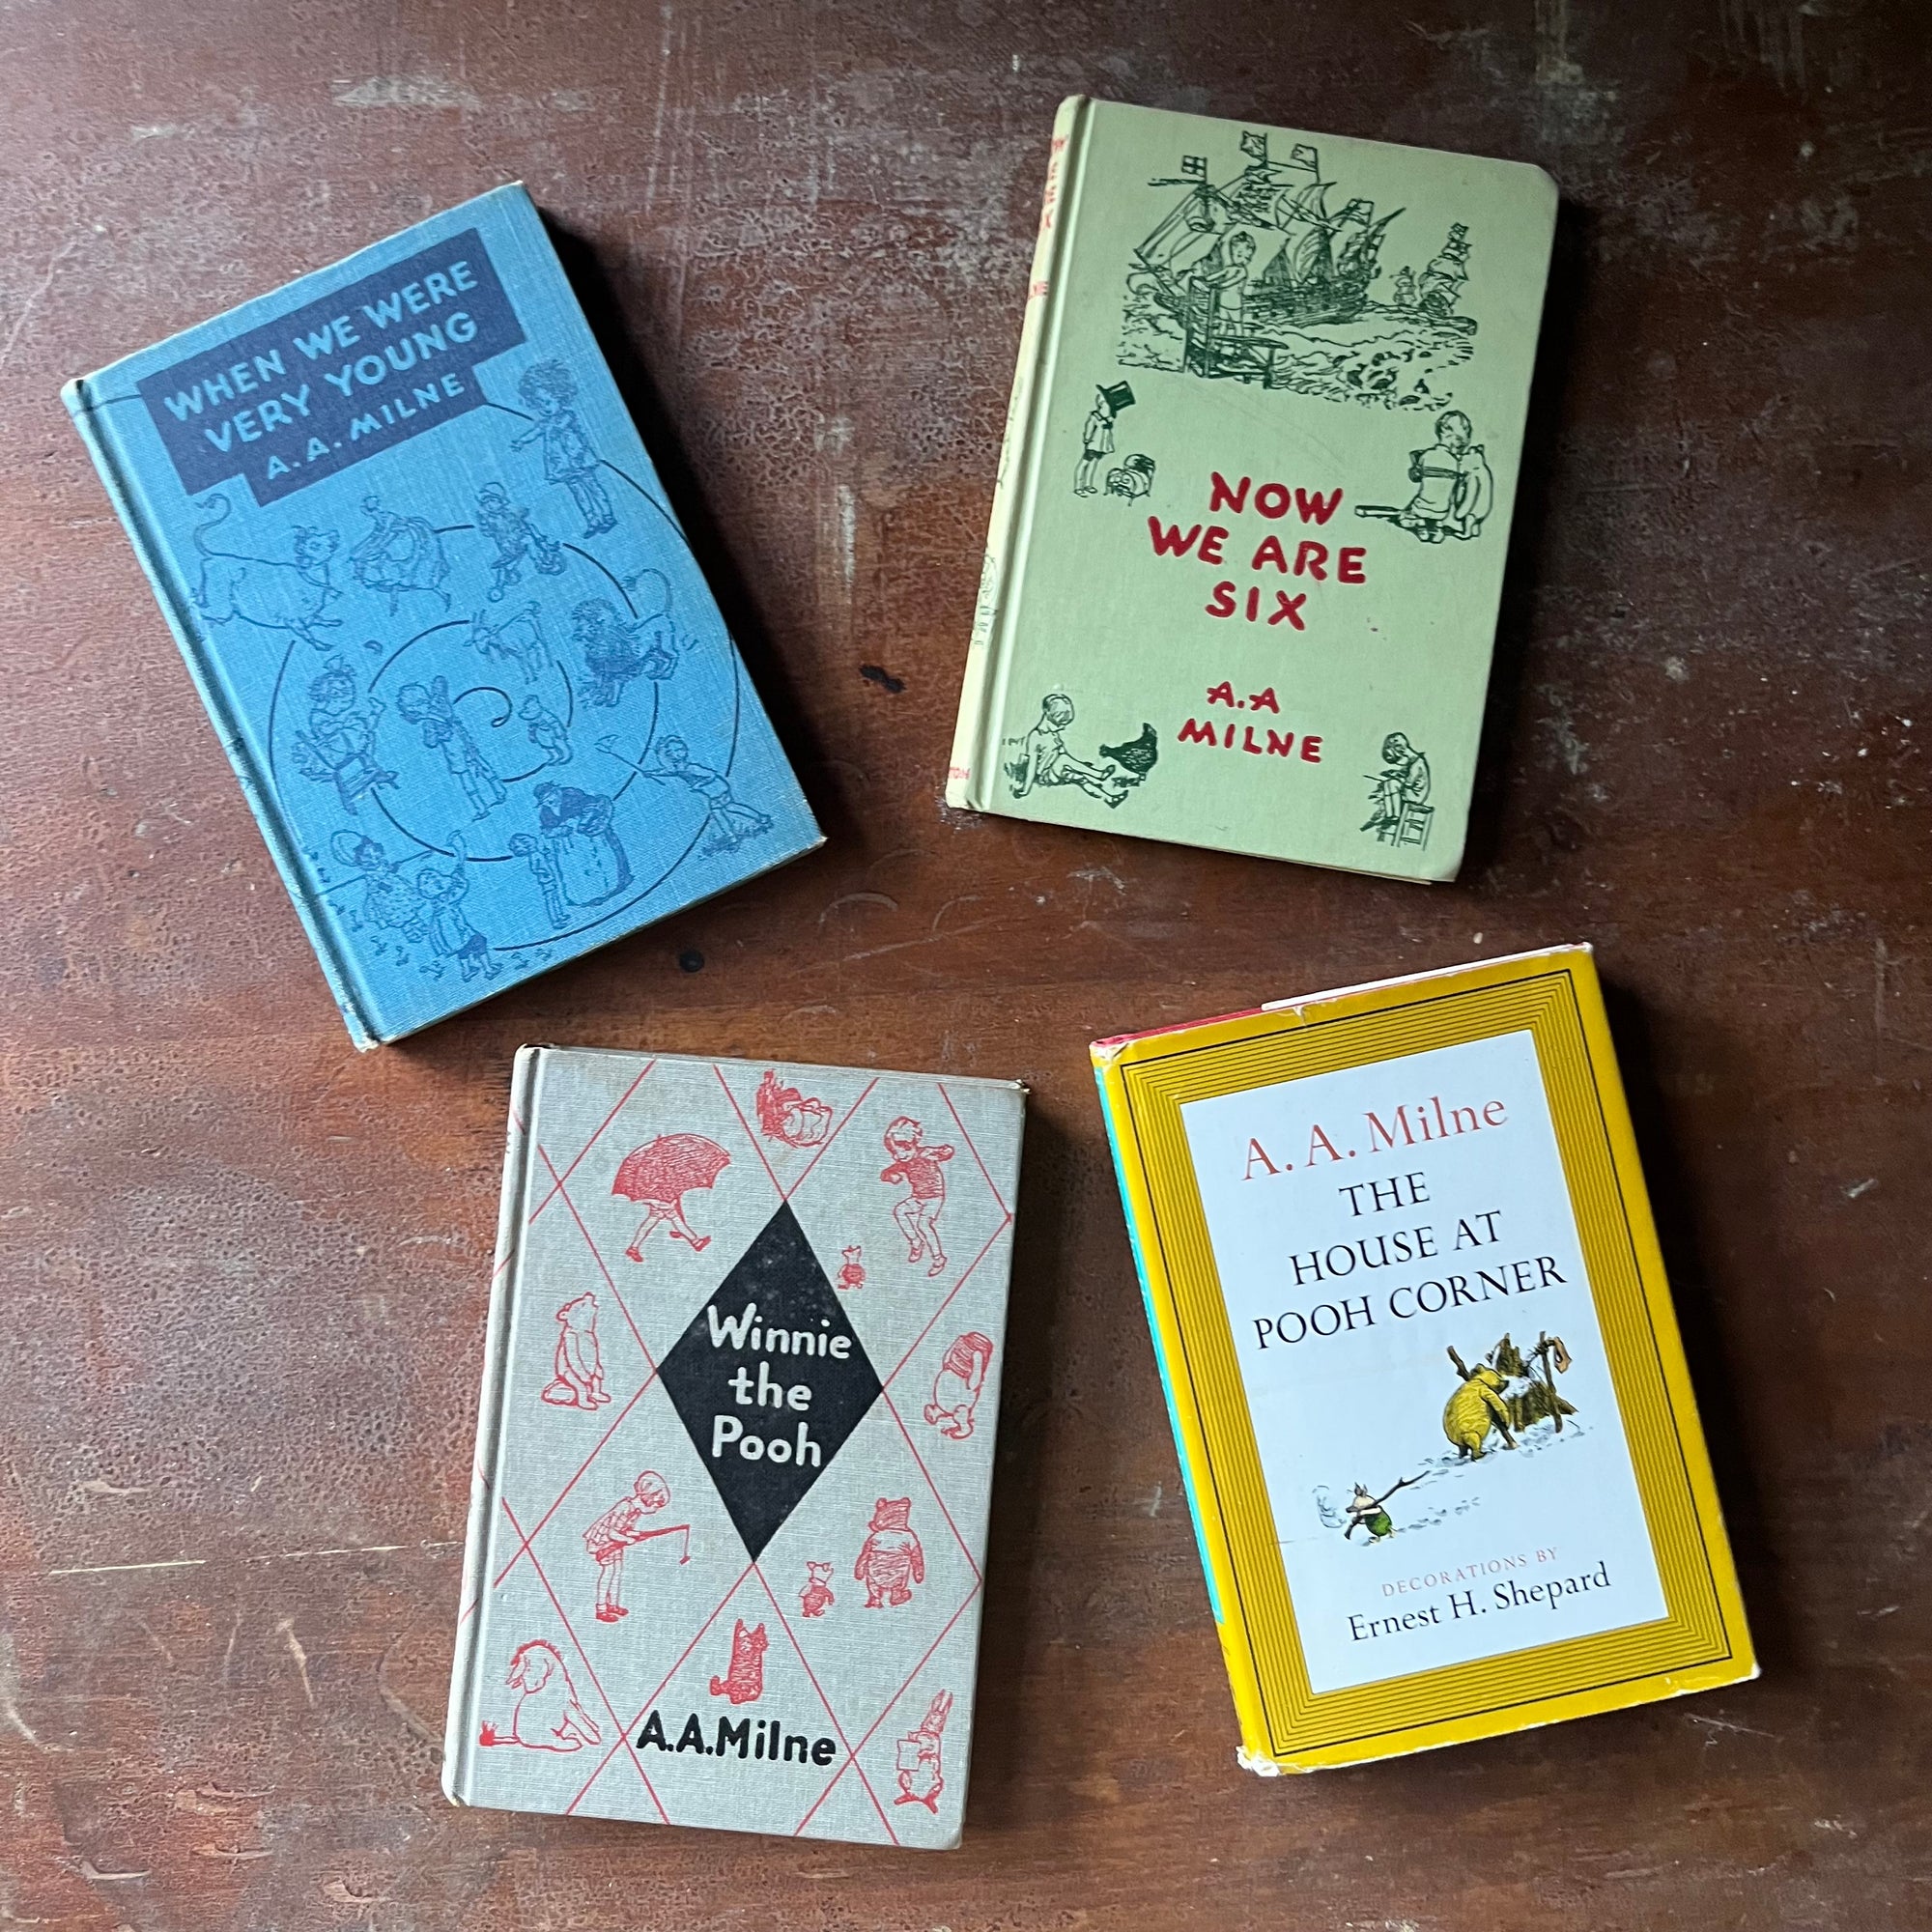 vintage children's storybooks, Winnie the Pooh, The House at Pooh Corner, When We Were Very Young & Now We are Six - Winnie the Pooh Four Book Set written by A. A. Milne with illustrations by Earnest H. Shepard - view of the front covers with a dust jacket on The House at Pooh Corner